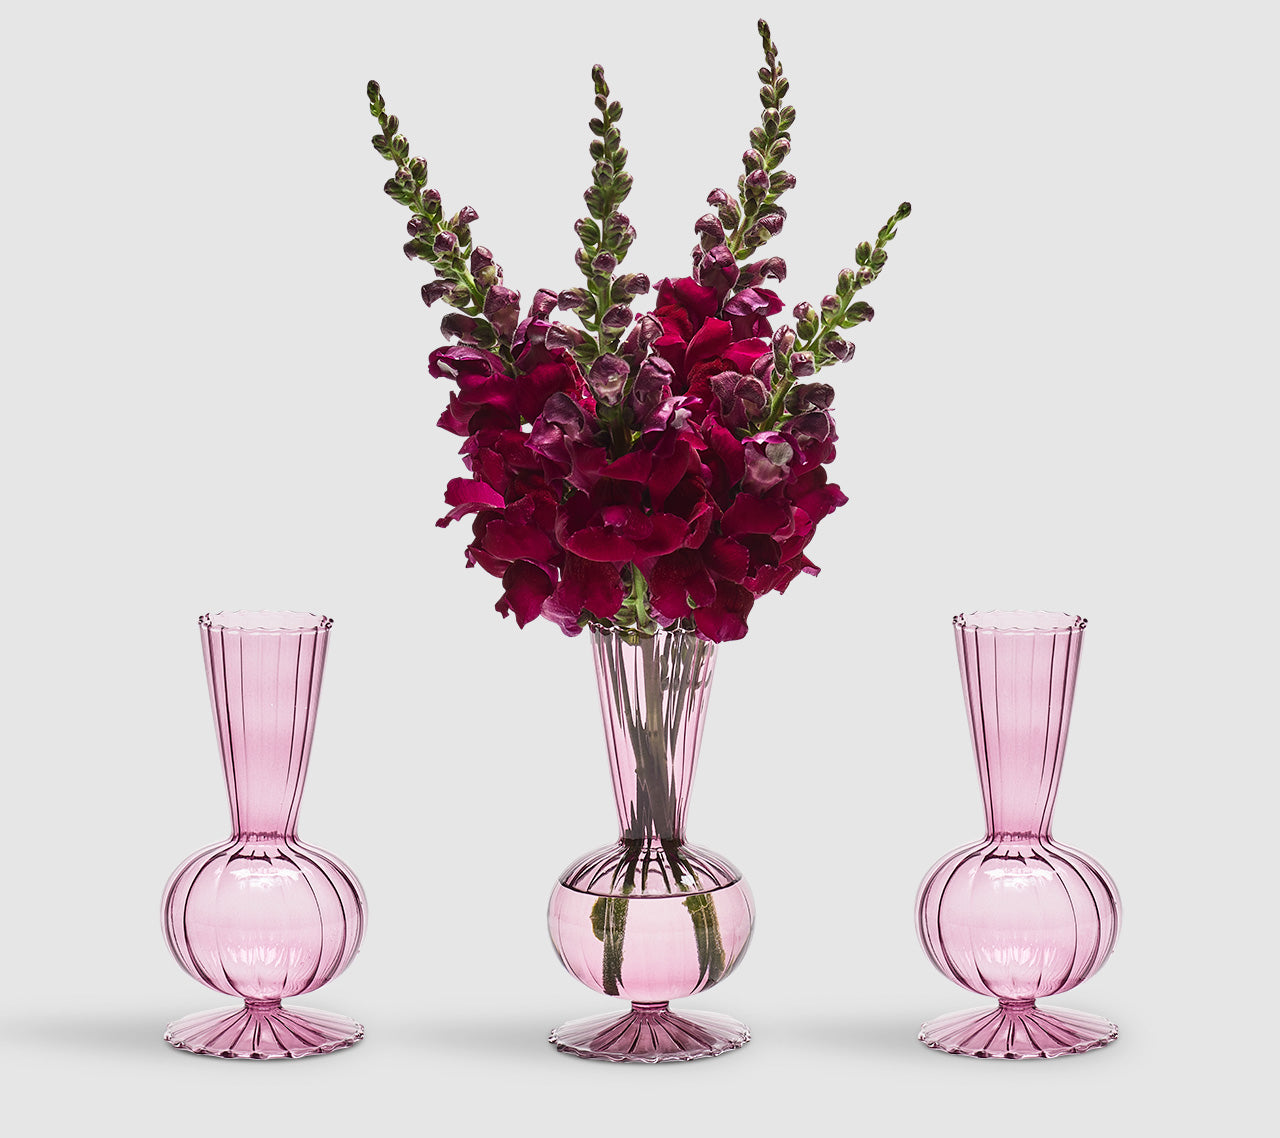 Three Tess Bud Vases in lavender, middle with deep pink flowers